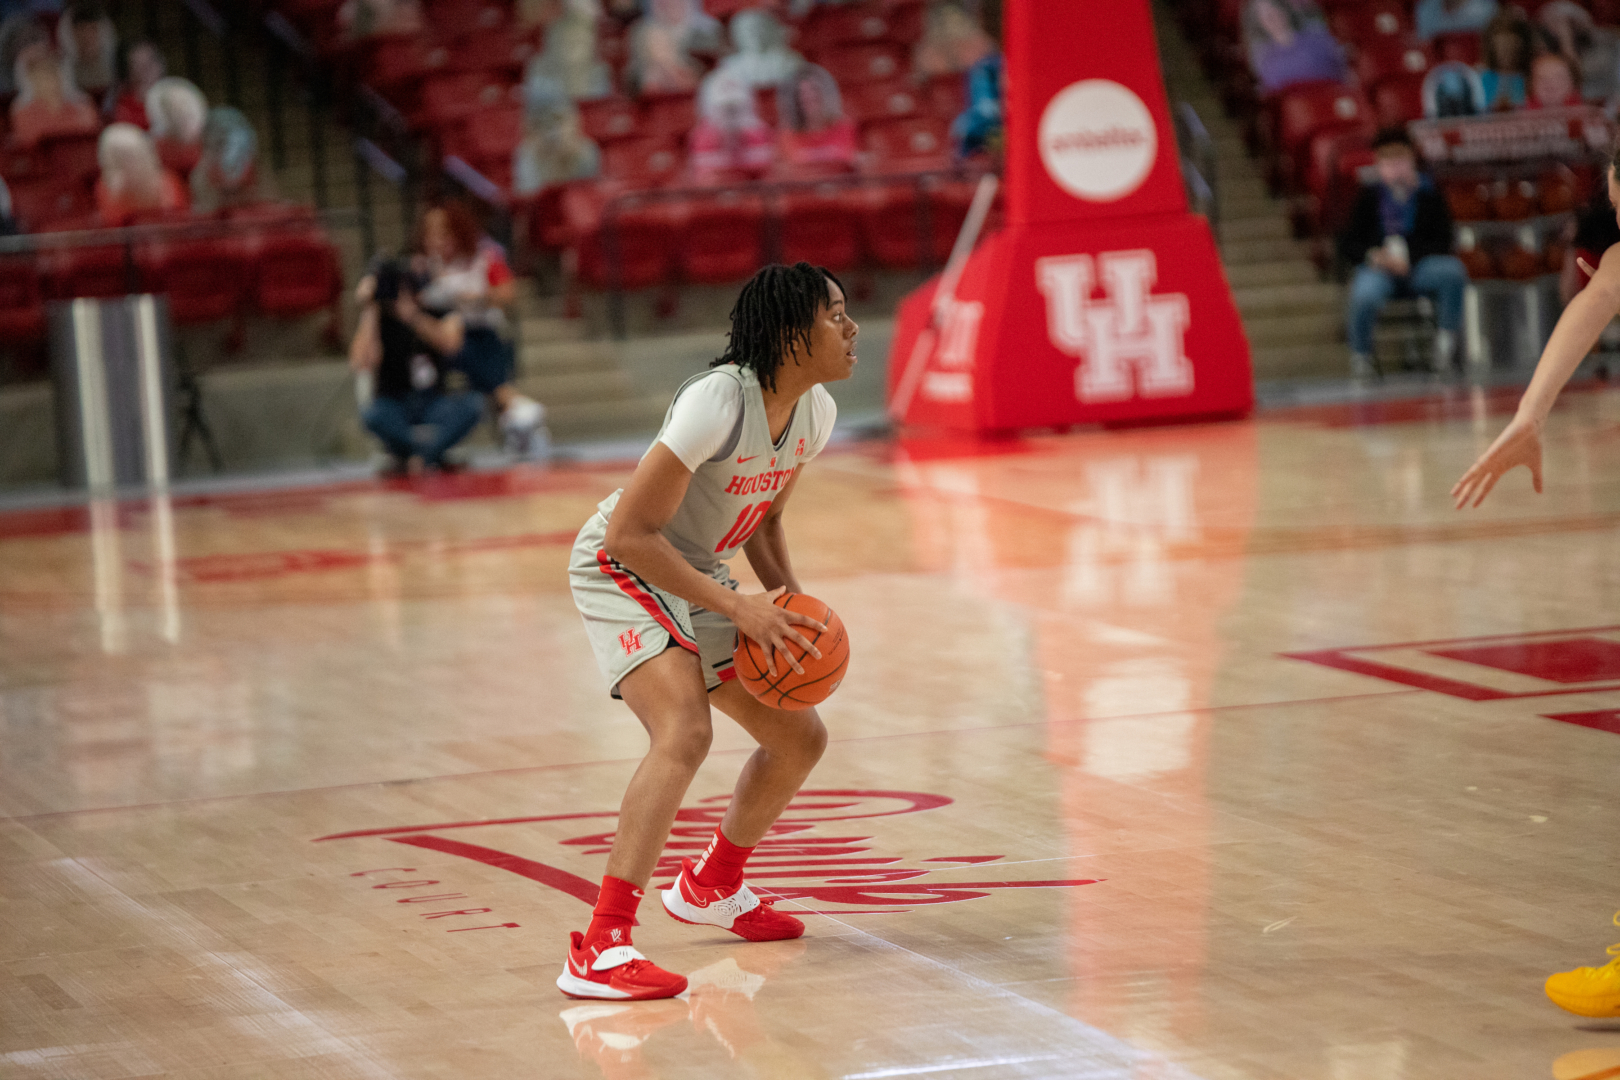 Sophomore guard Britney Onyeje sizes up the defense against Wichita State | Andy Yanez/The Cougar